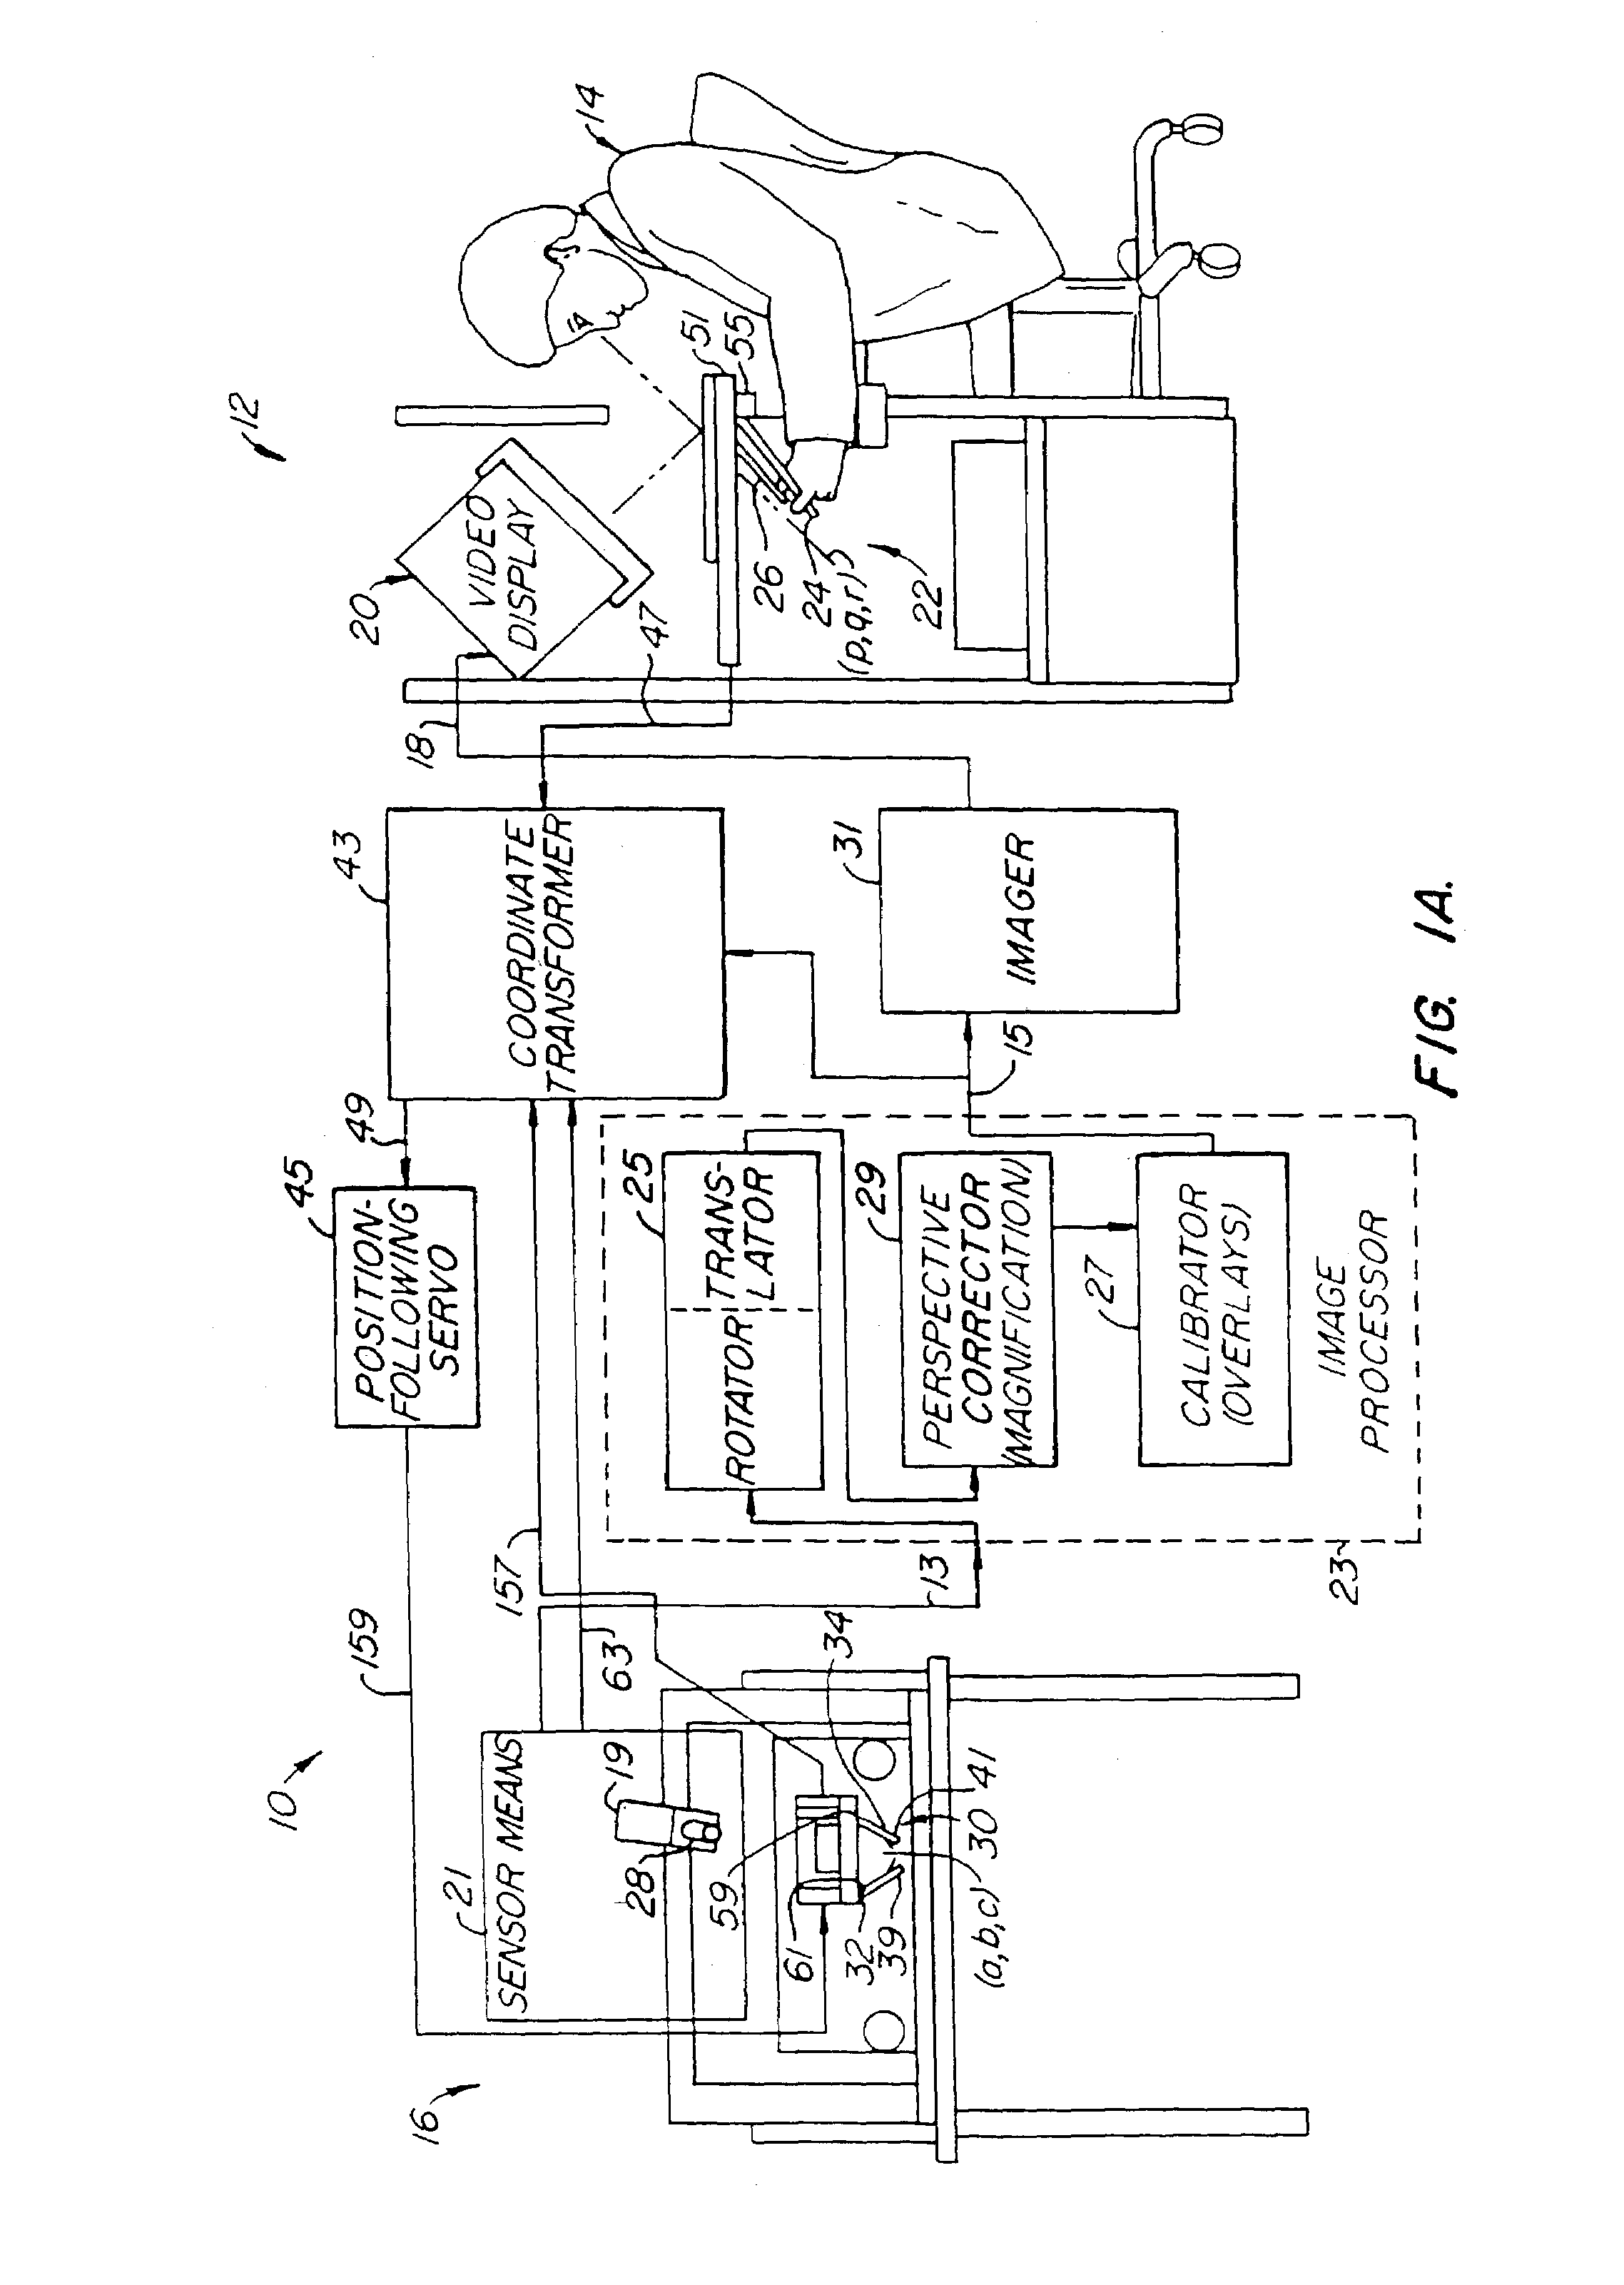 Method and apparatus for transforming coordinate systems in a telemanipulation system